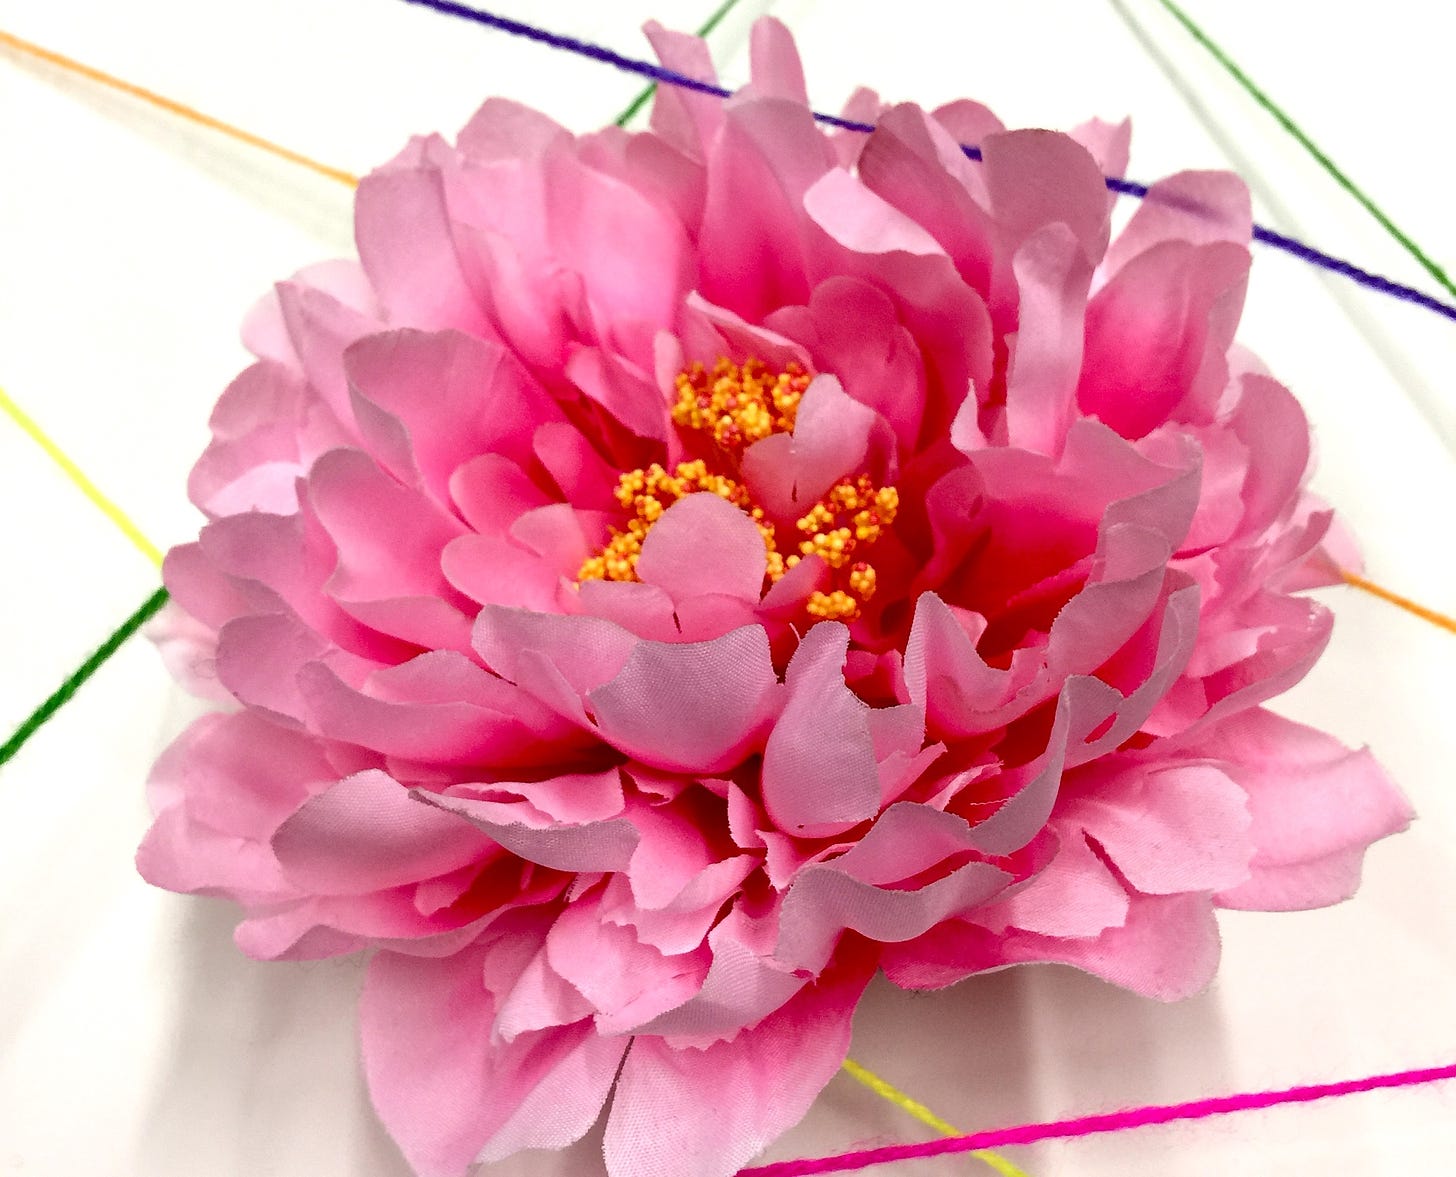 A bright pink artificial peony sits against a white background with crossing lines of colored yarn.